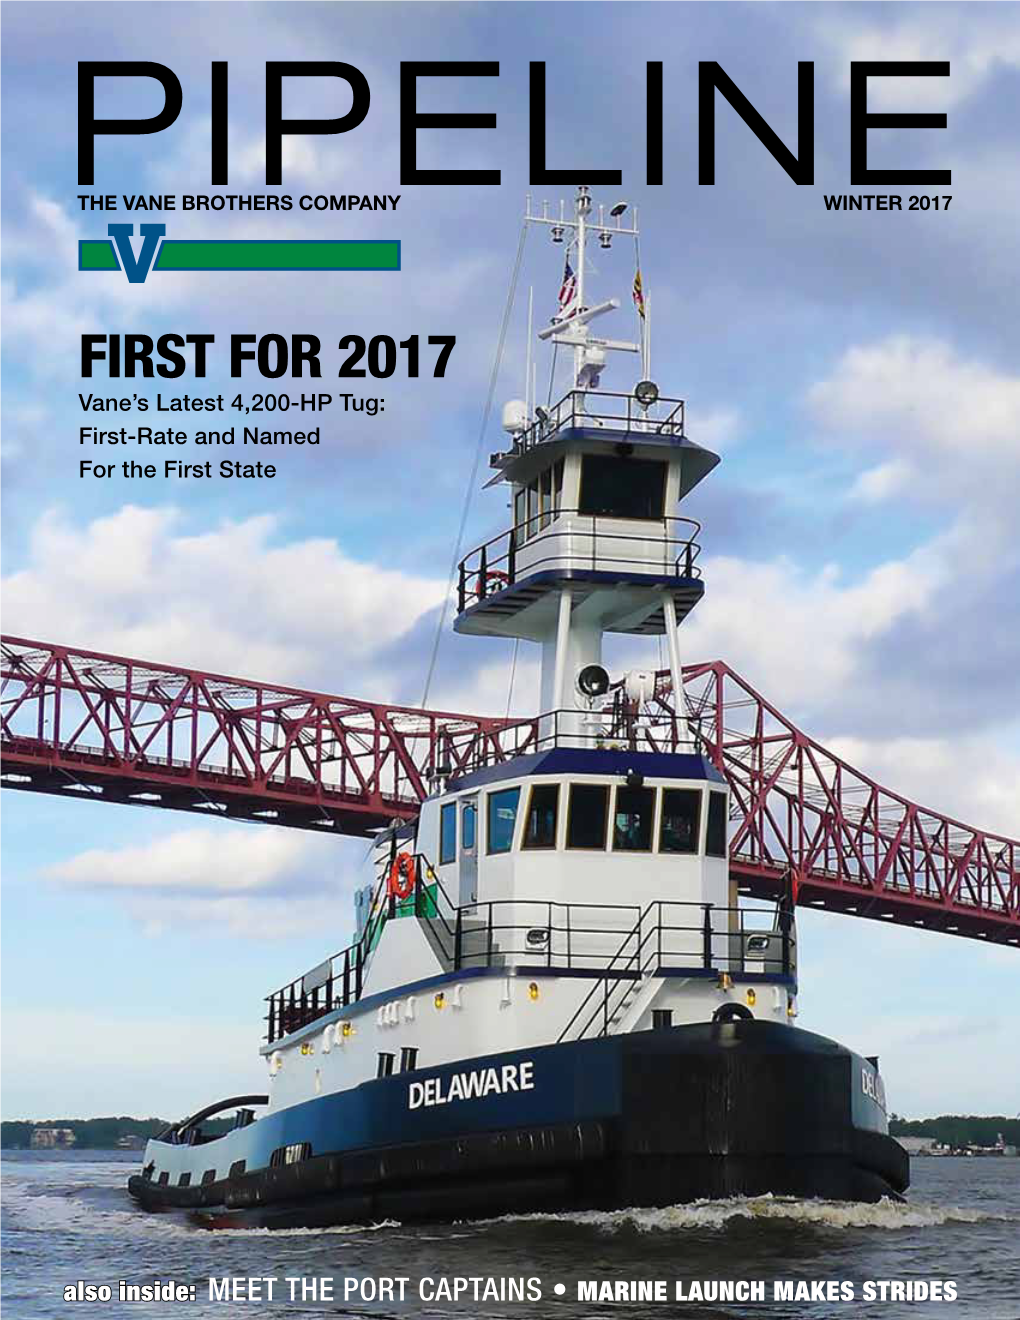 FIRST for 2017 Vane’S Latest 4,200-HP Tug: First-Rate and Named for the First State